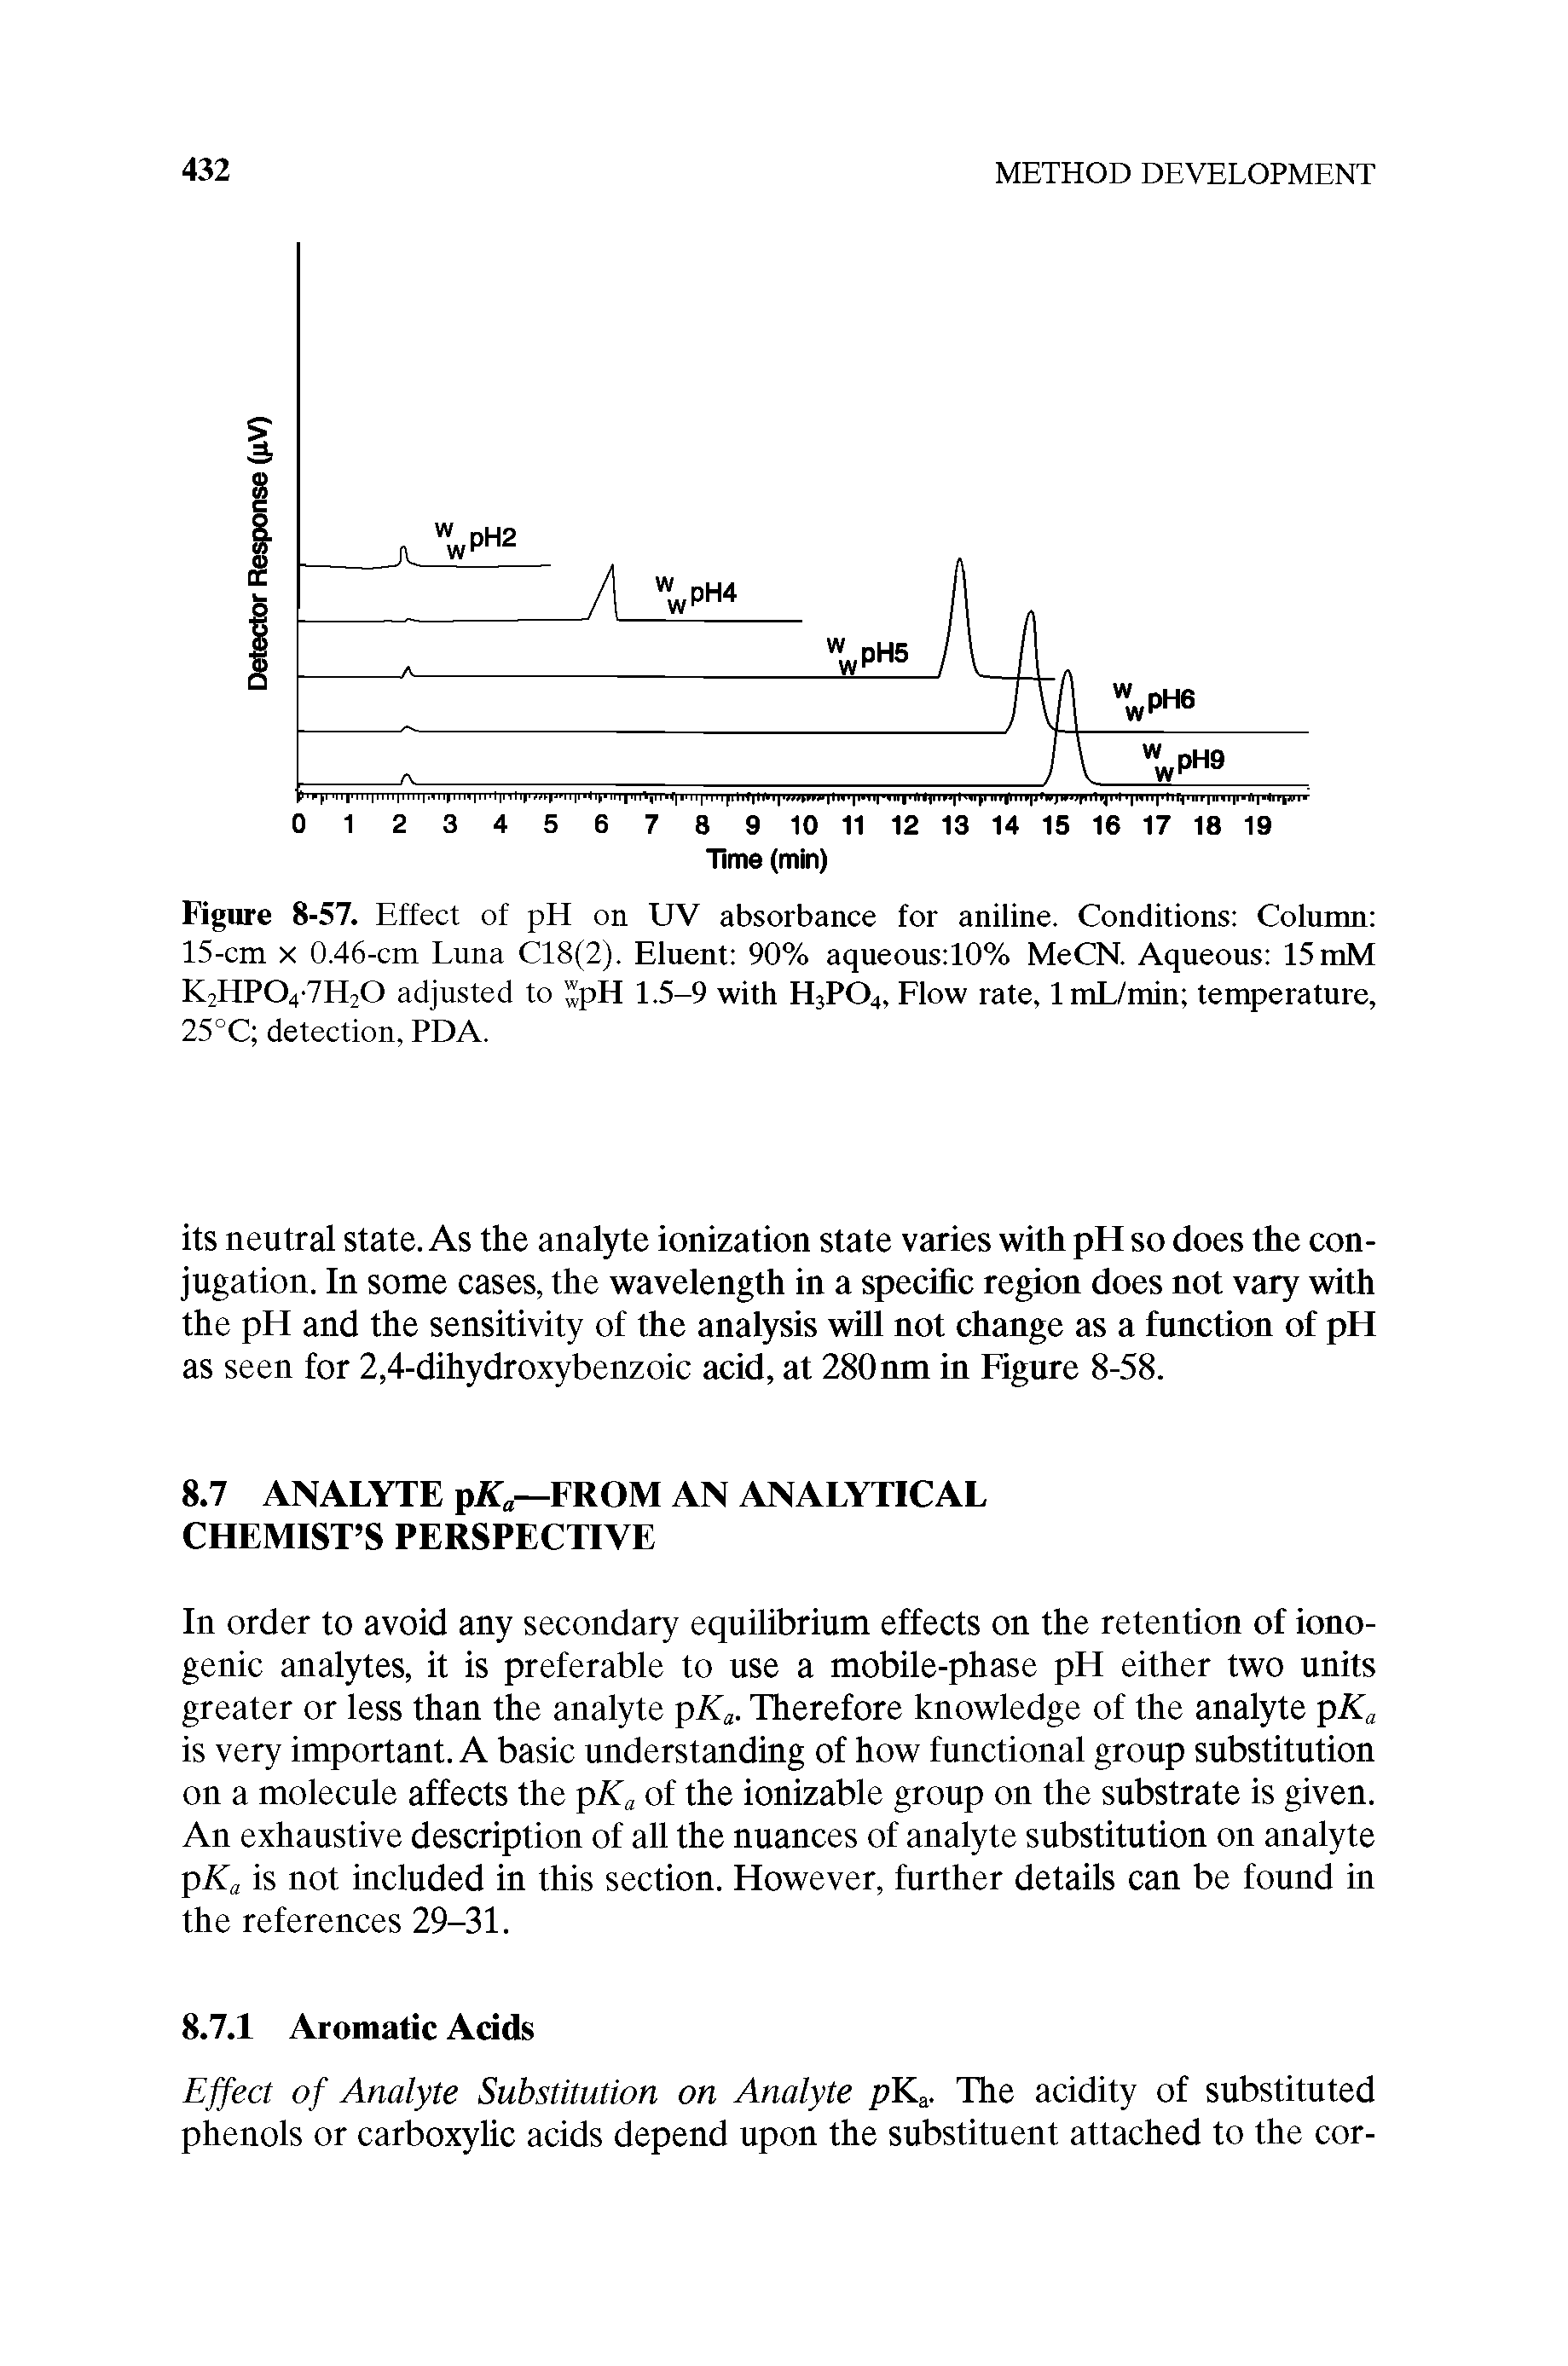 Figure 8-57. Effect of pH on UV absorbance for aniline. Conditions Column 15-cm X 0.46-cm Luna C18(2). Eluent 90% aqueous 10% MeCN. Aqueous 15mM K2HP04-7H20 adjusted to "pH 1.5-9 with H3PO4, Flow rate, ImL/min temperature,...